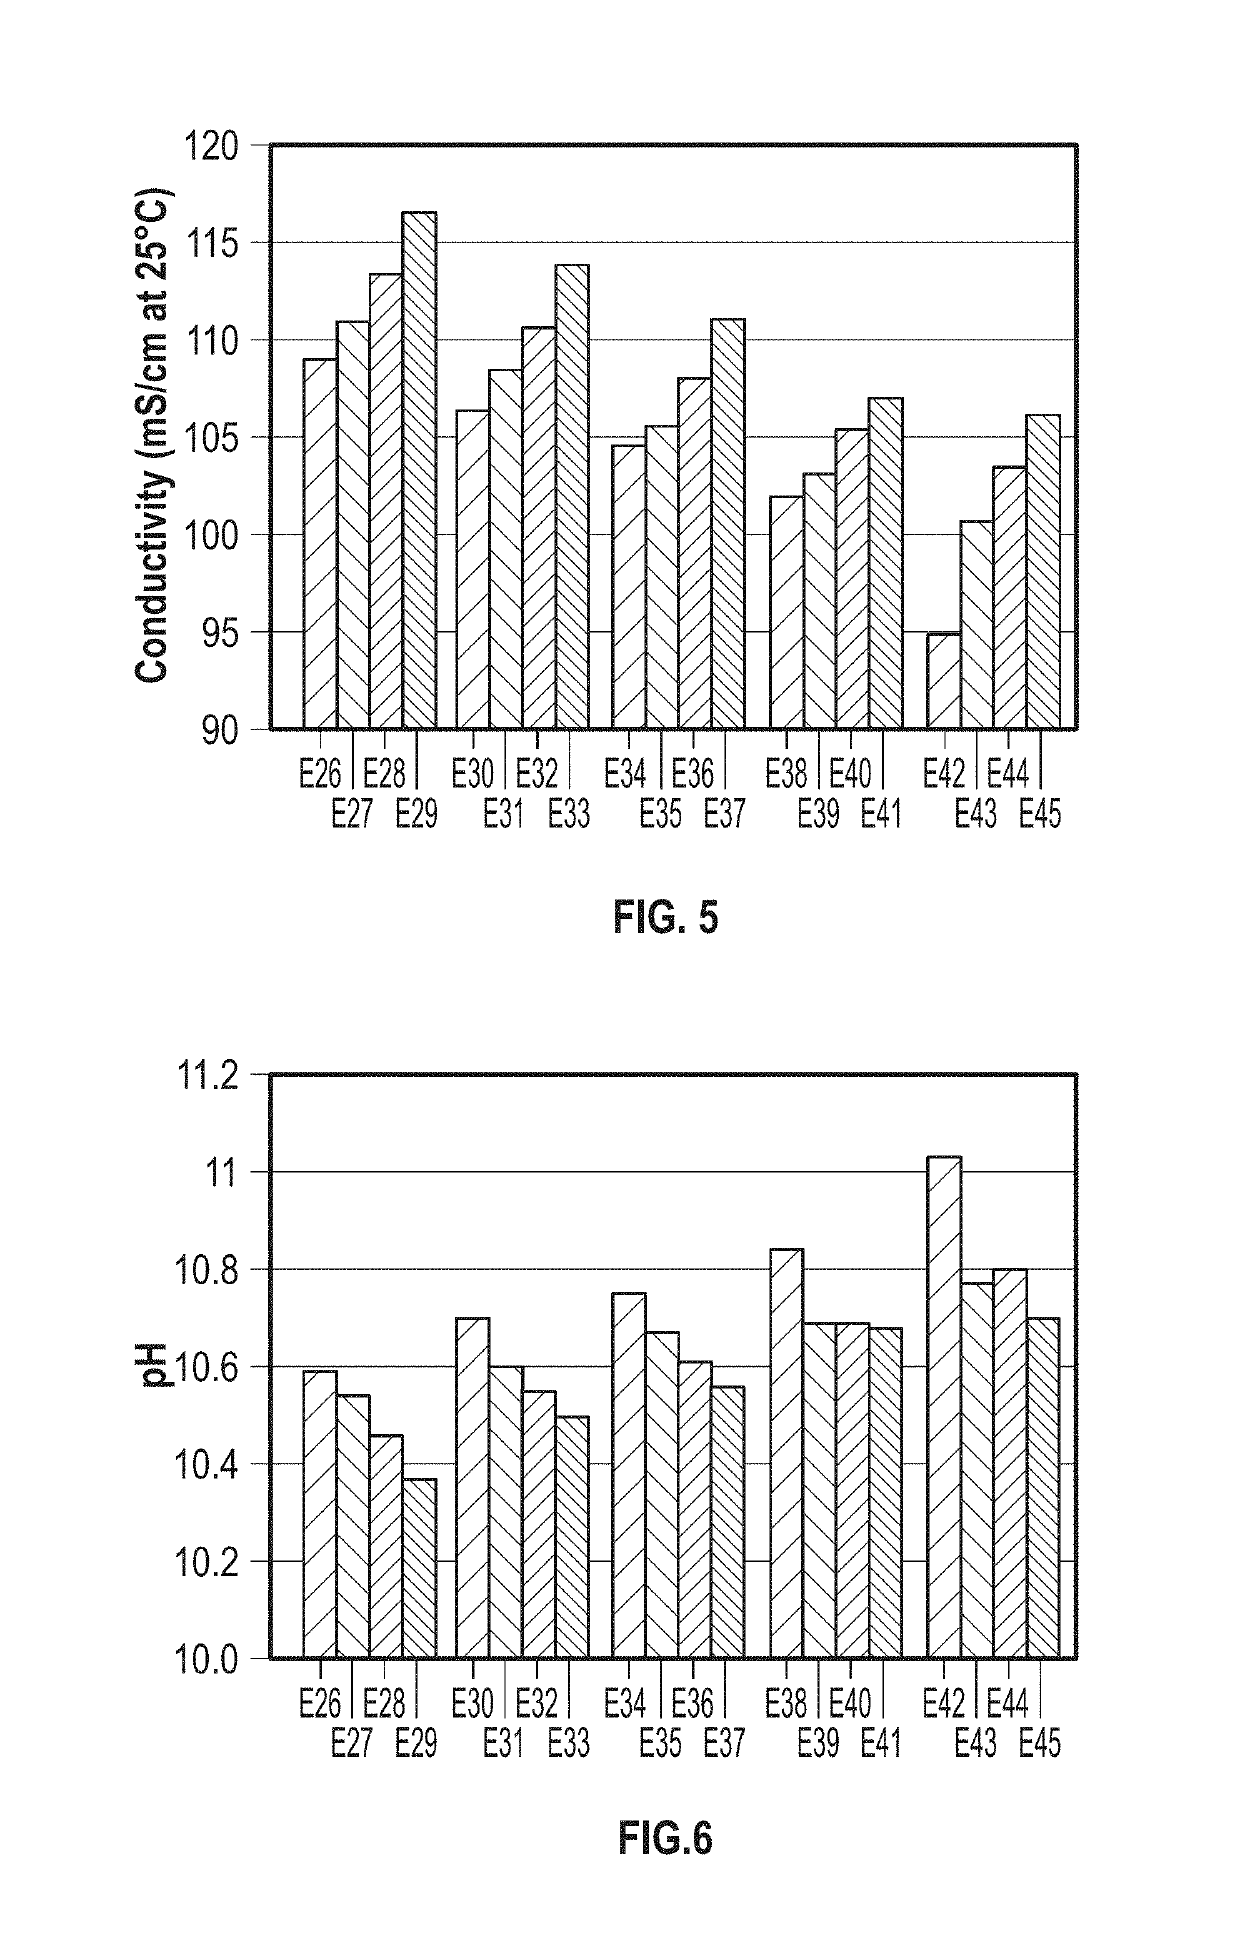 Systems and methods for forming a solution of ammonium carbamate